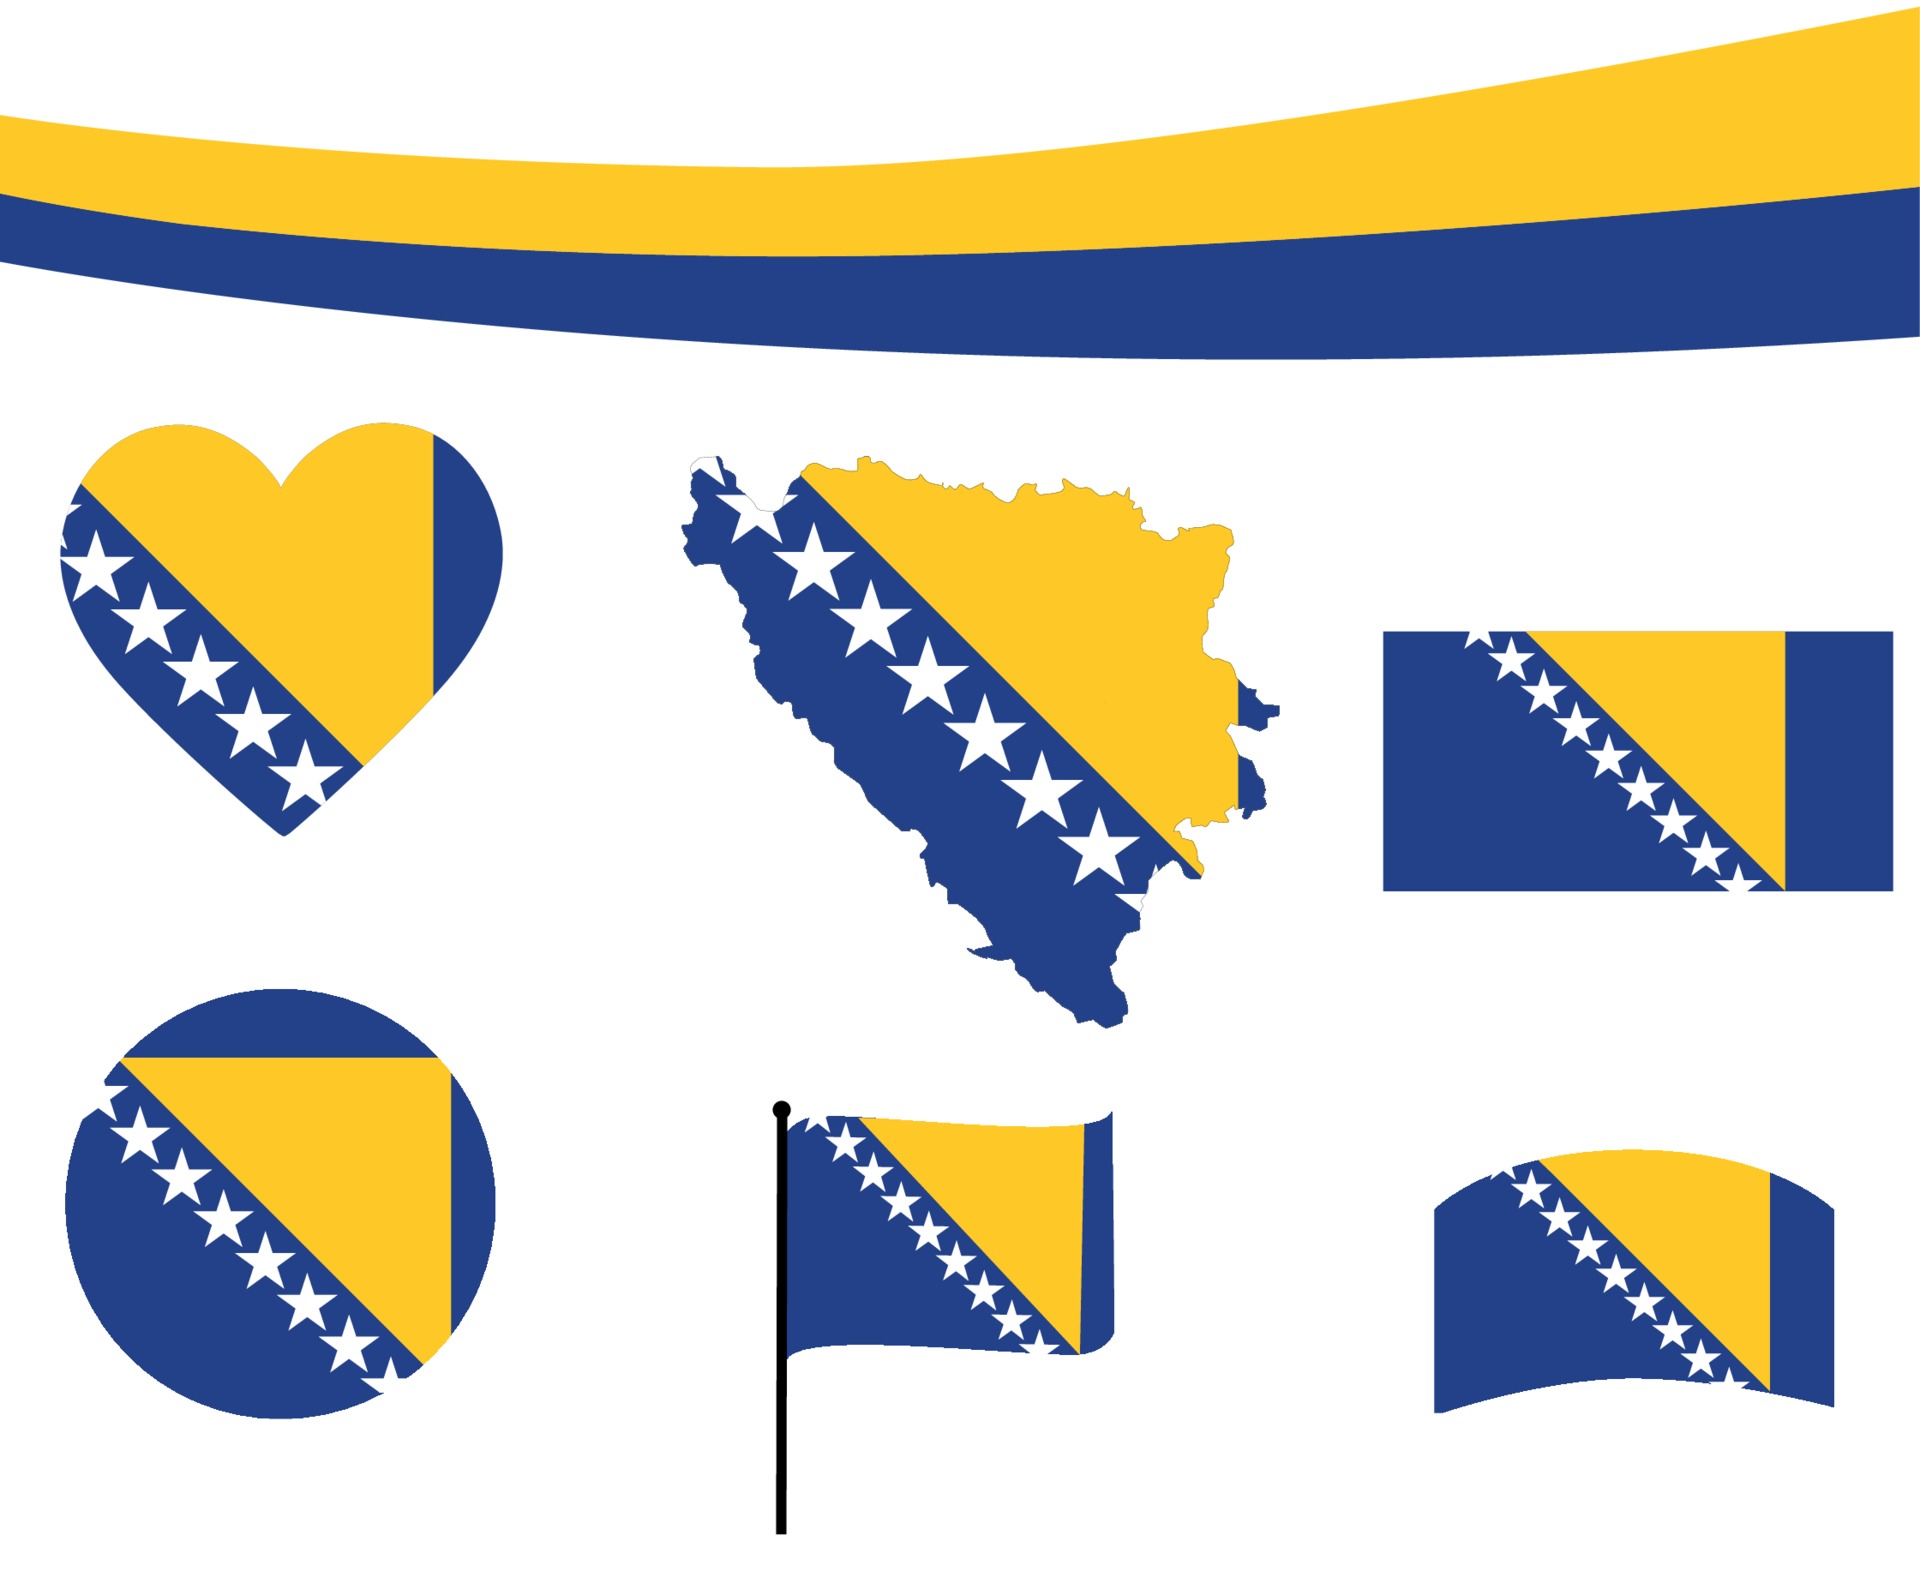 https://static.vecteezy.com/system/resources/previews/003/068/947/original/bosnia-and-herzegovina-flag-map-ribbon-and-heart-icon-abstract-free-vector.jpg